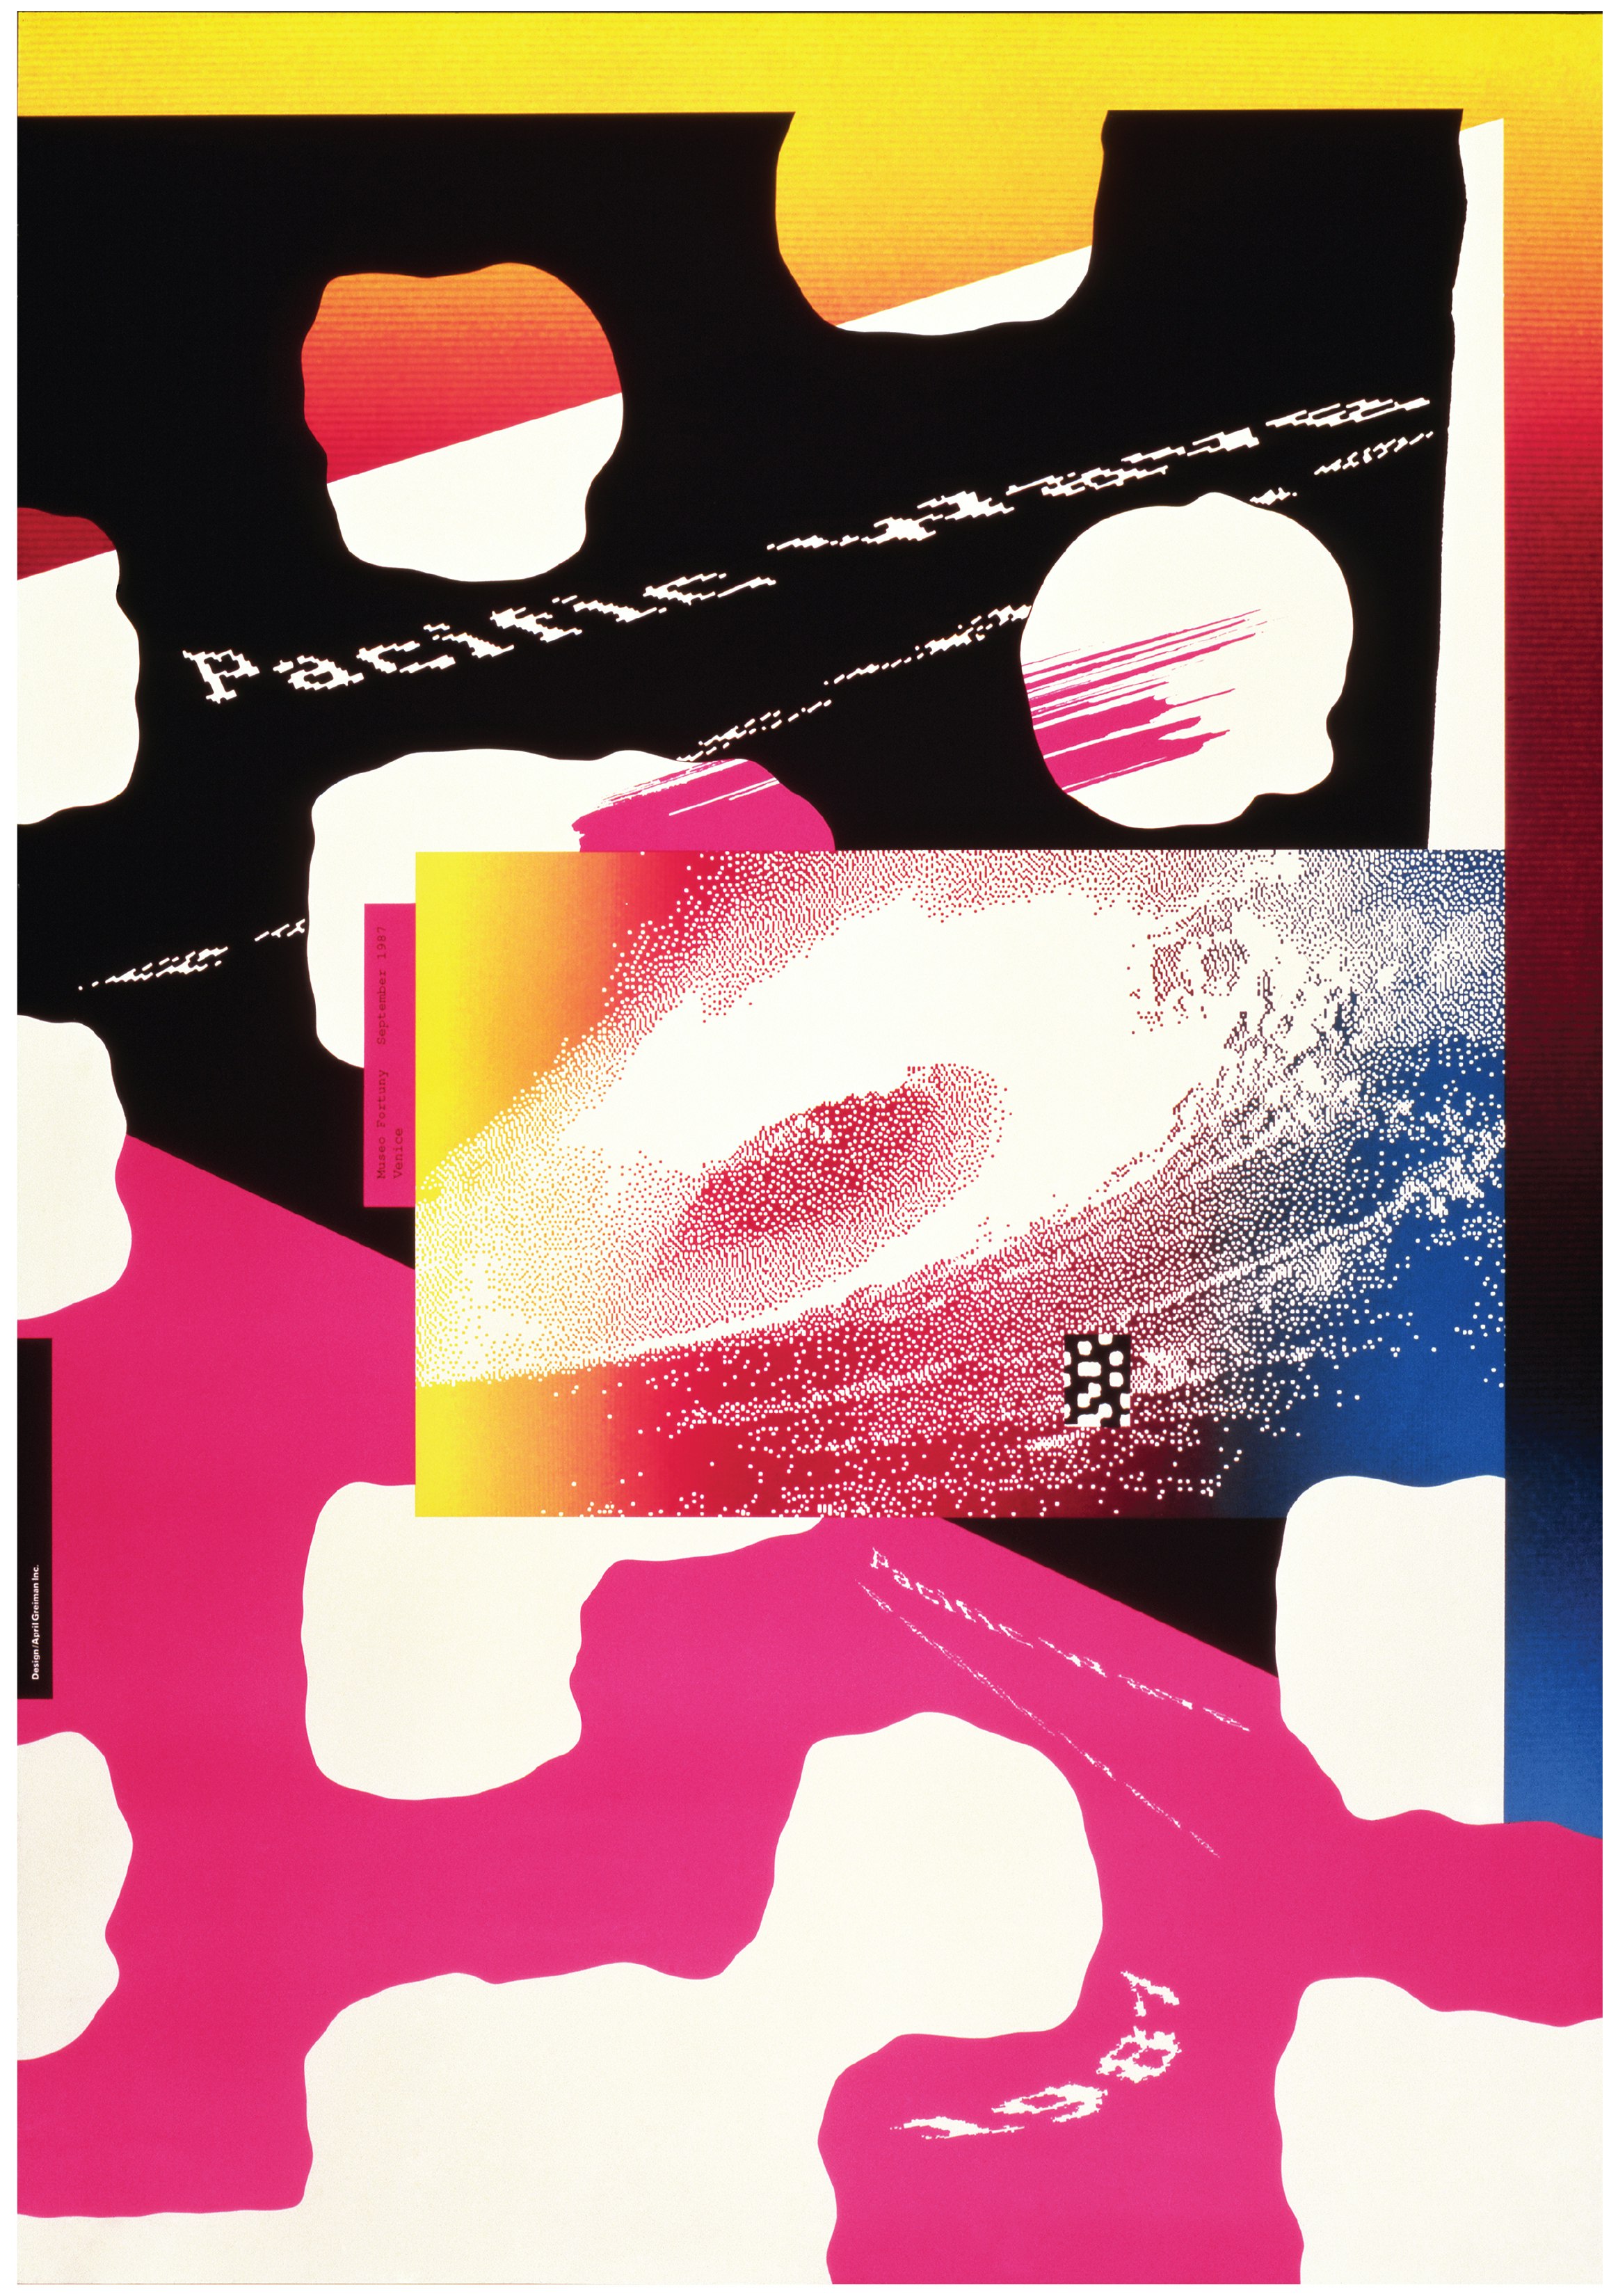 Pacific Wave, 1987, April Greiman. Offset lithograph, fluorescent process ink. Los Angeles County Museum of Art, purchased with funds provided by the Decorative Arts and Design Council Acquisition Fund and the Ralph M. Parsons Fund. Digital image courtesy of the artist.. ©April Greiman.